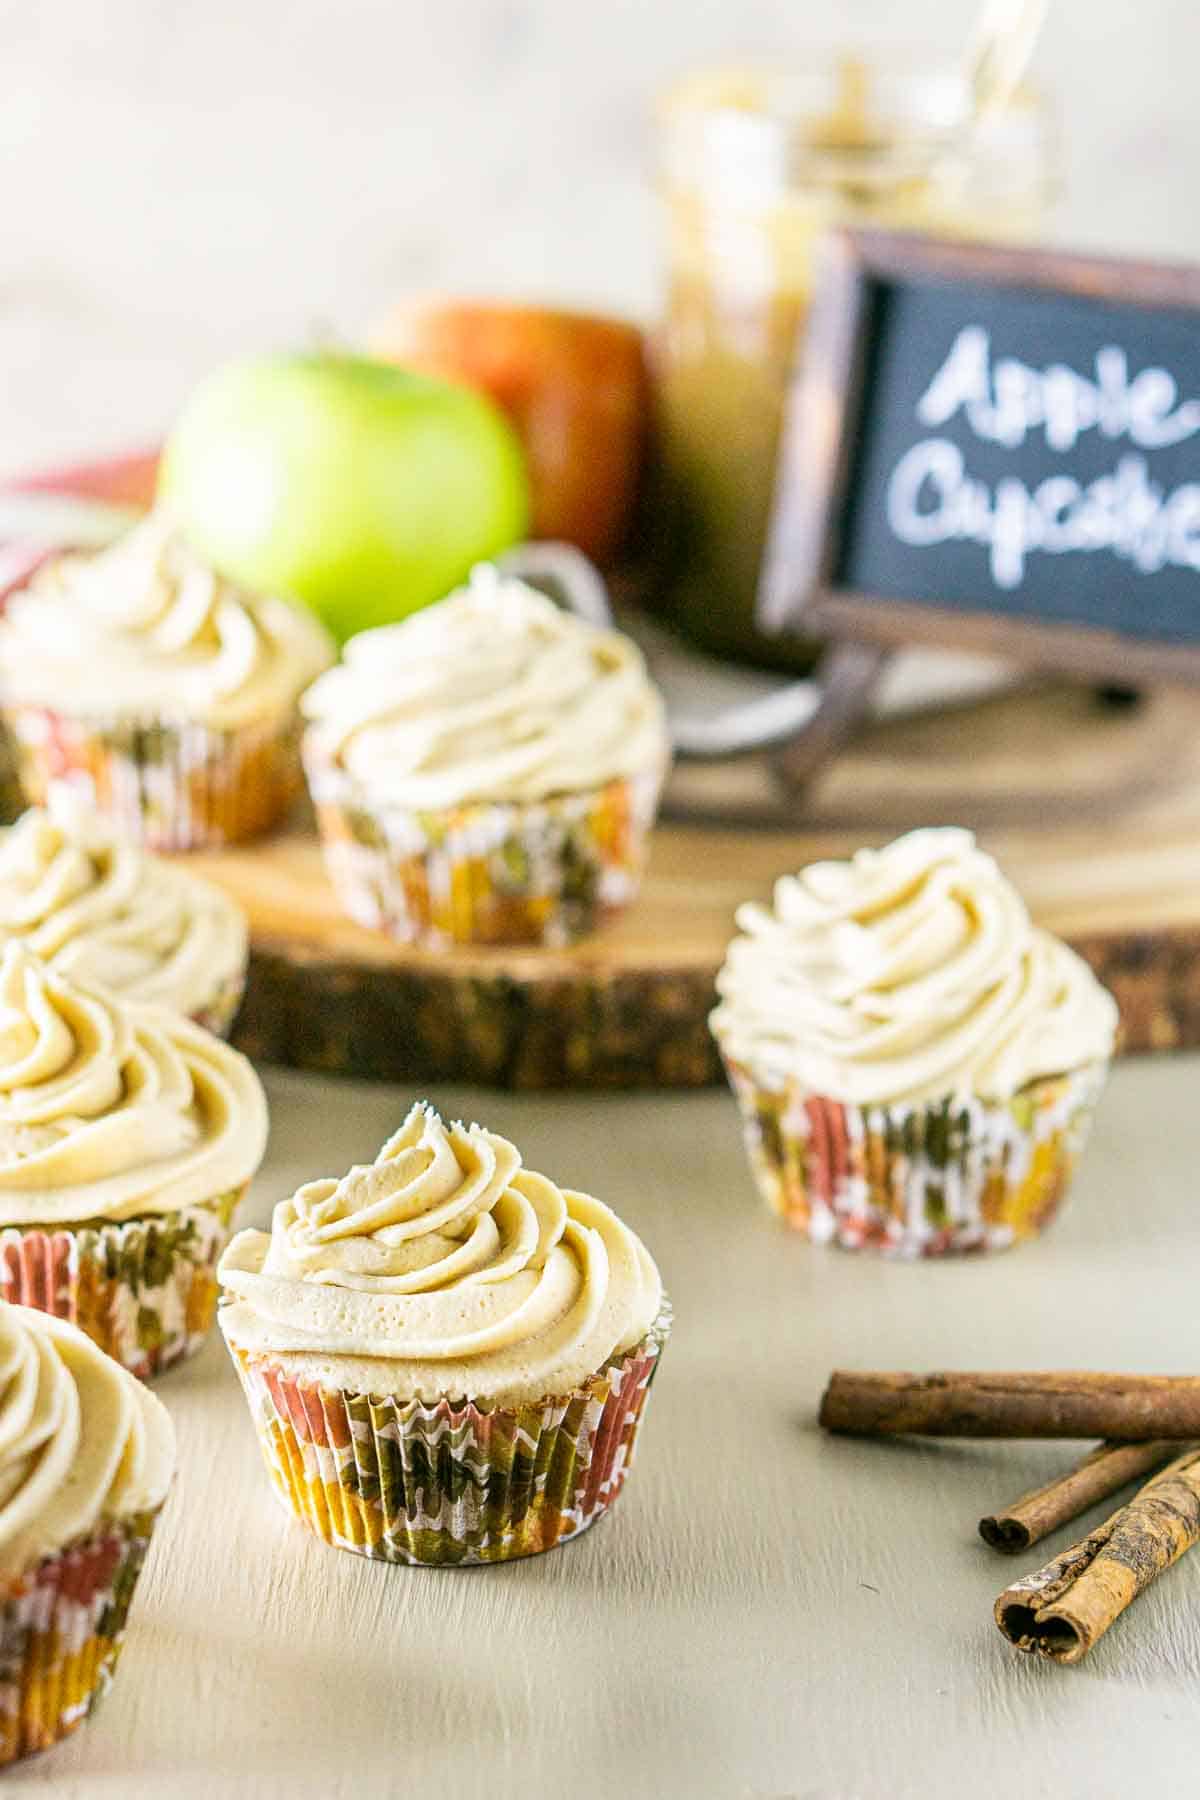 A close-up of an apple spice cupcakes with cinnamon sticks to the right and more cupcakes to the left.